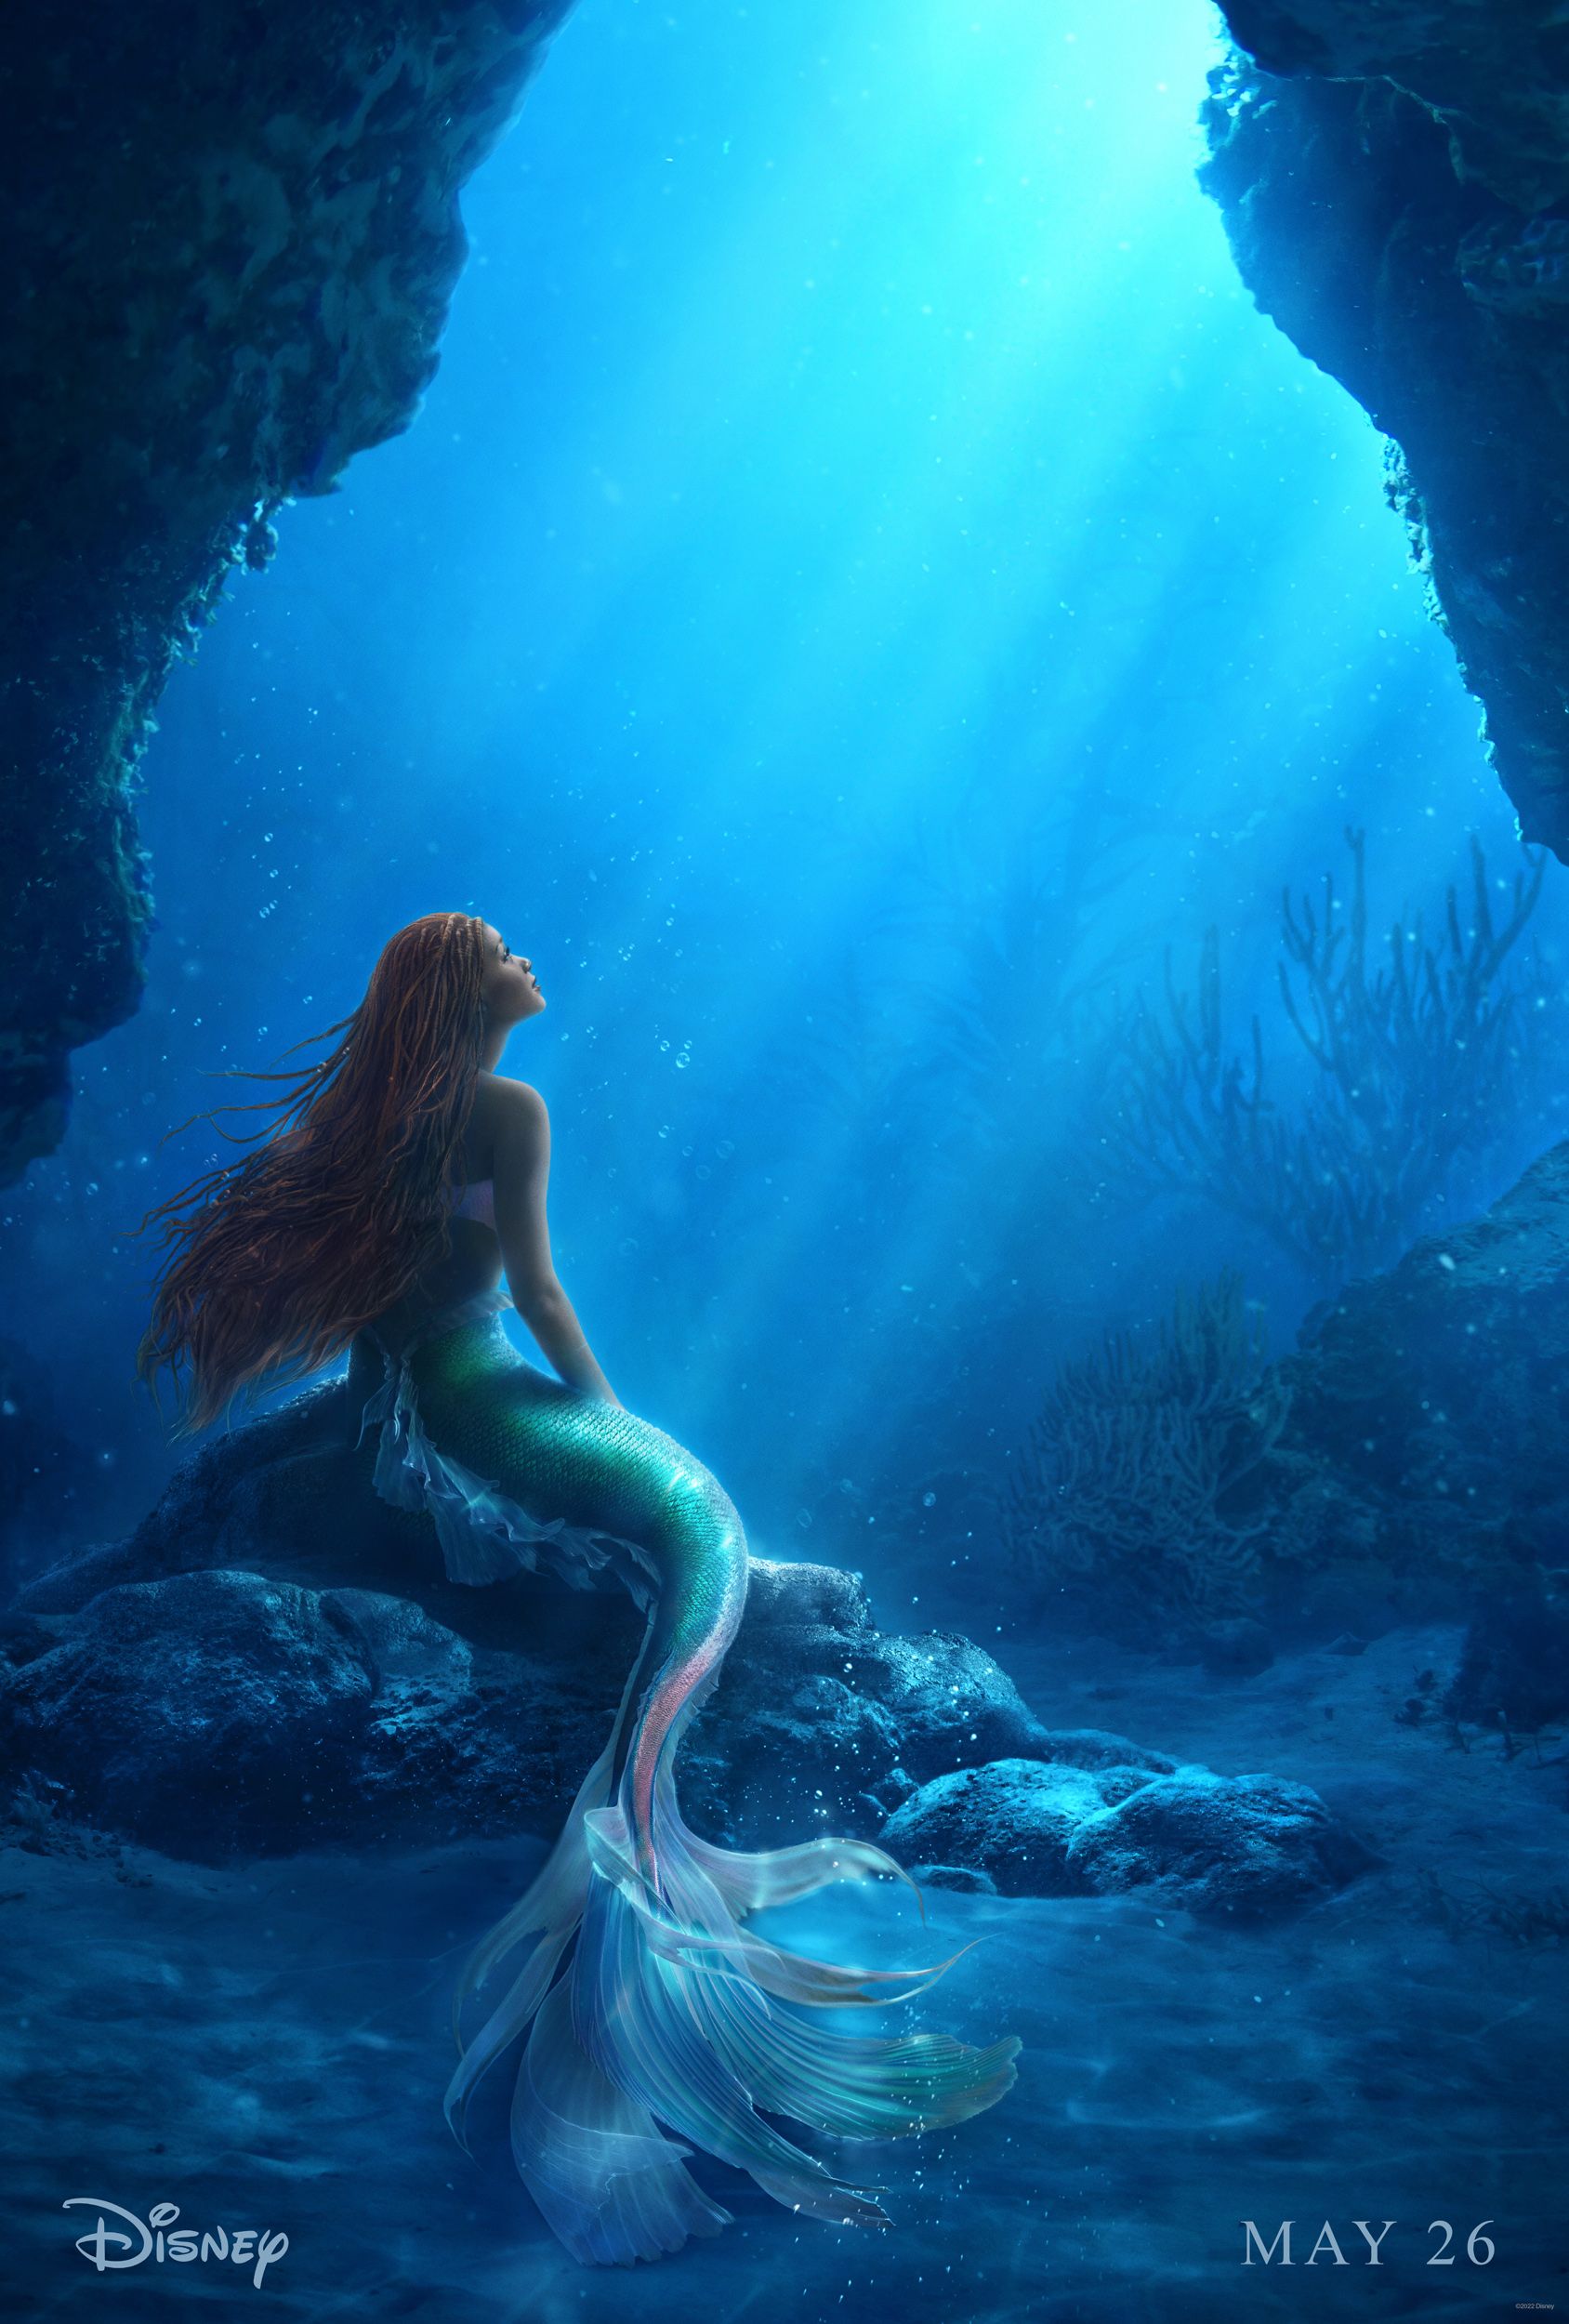 Disney's Little Mermaid Drops a Stunning New Look at Halle Bailey's Ariel